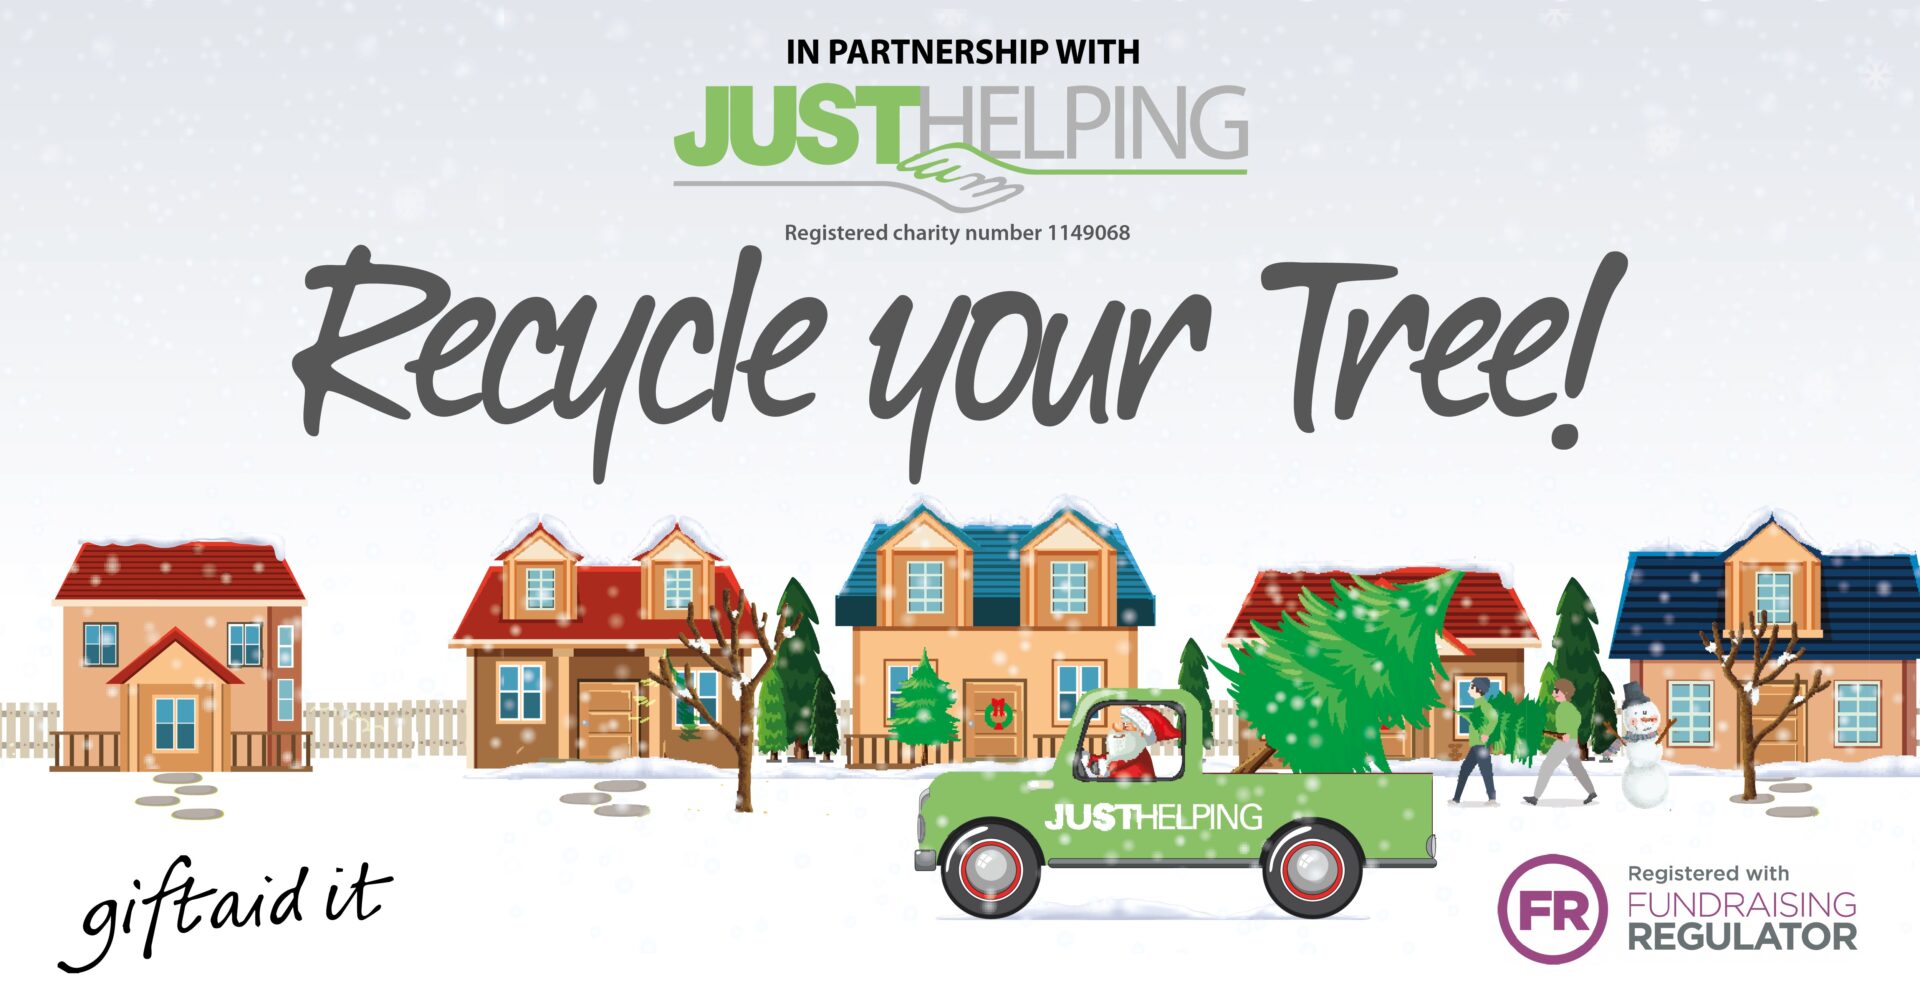 Graphic illustration of Recycle your Christmas tree